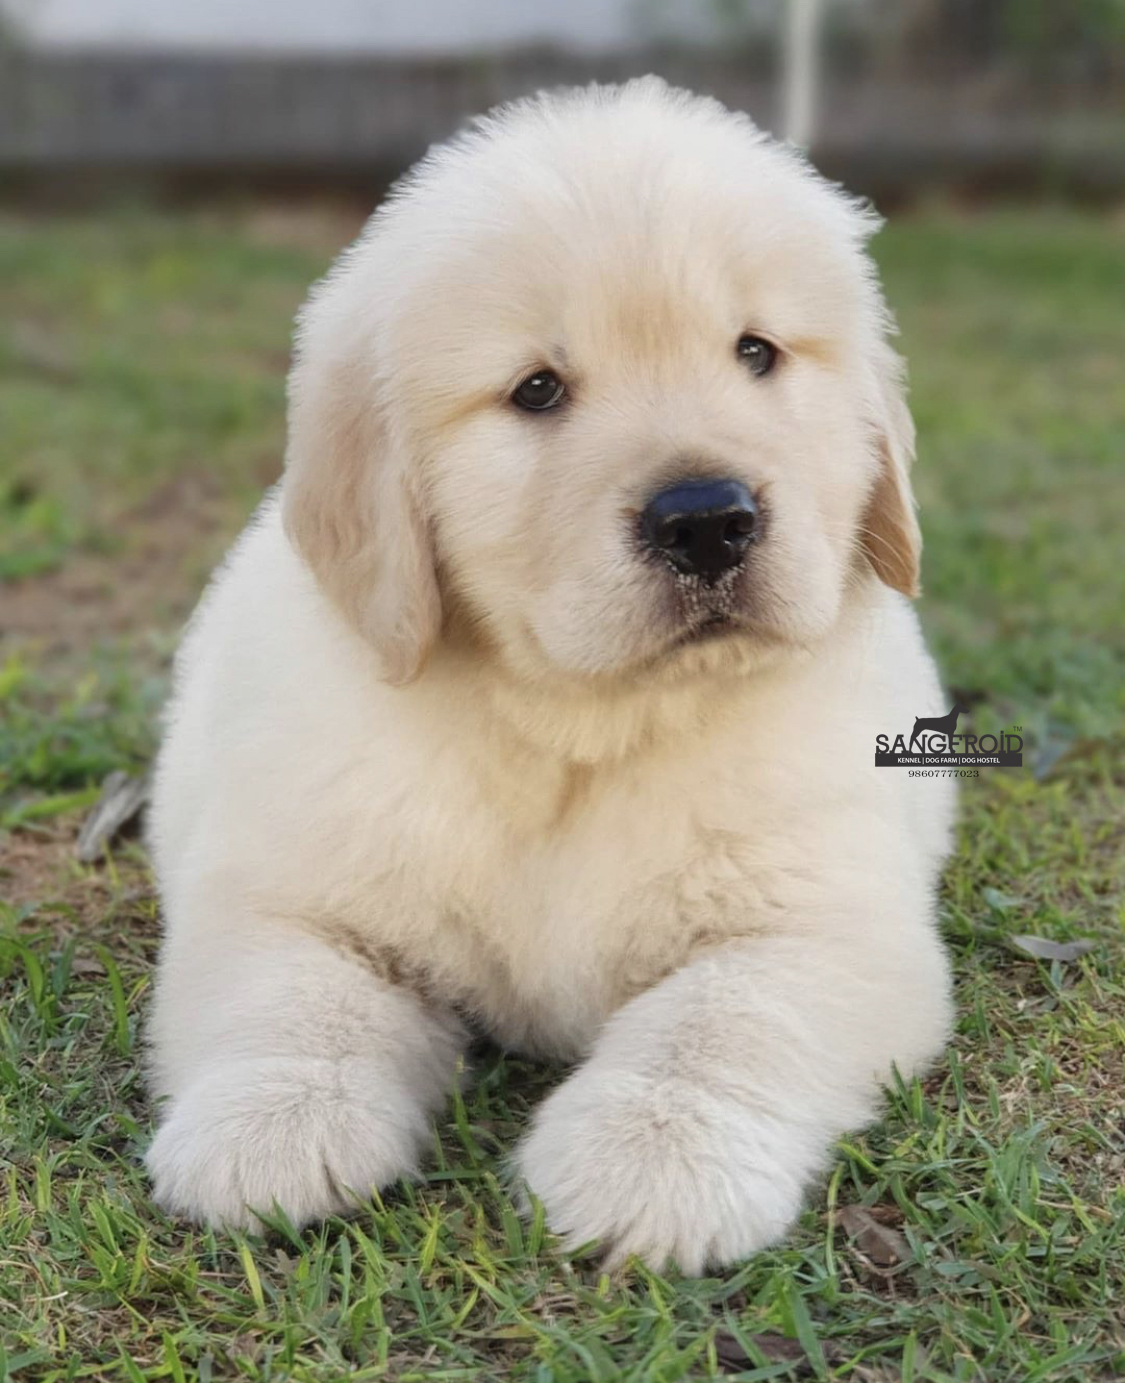 Image of GOLDEN Retriever posted on 2022-08-22 04:07:05 from Mumbai